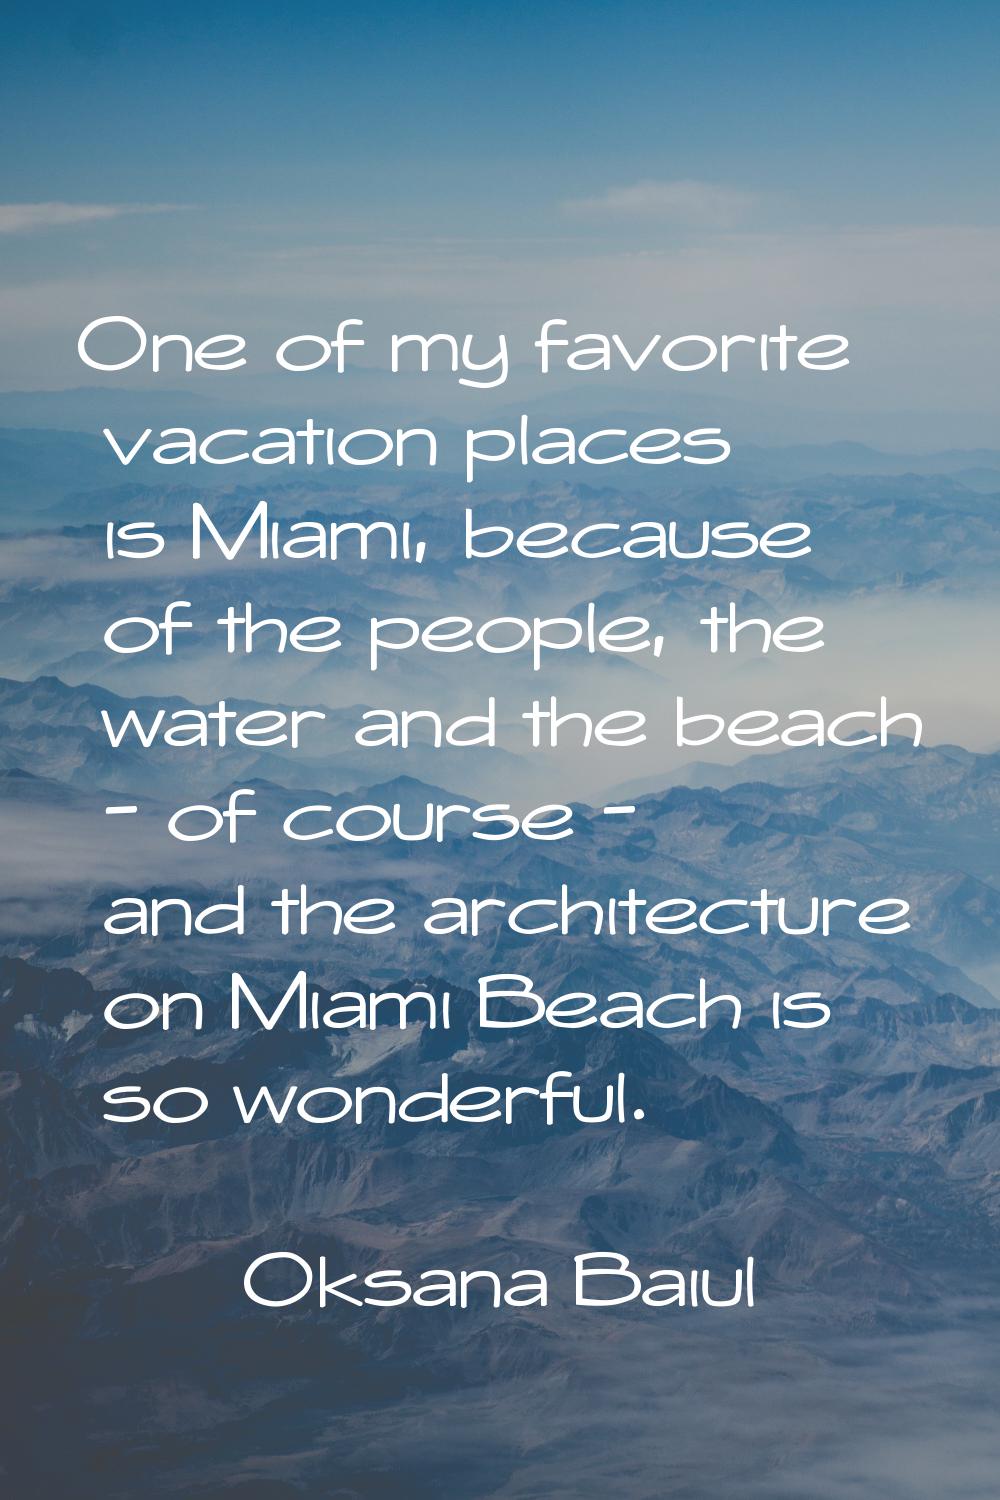 One of my favorite vacation places is Miami, because of the people, the water and the beach - of co